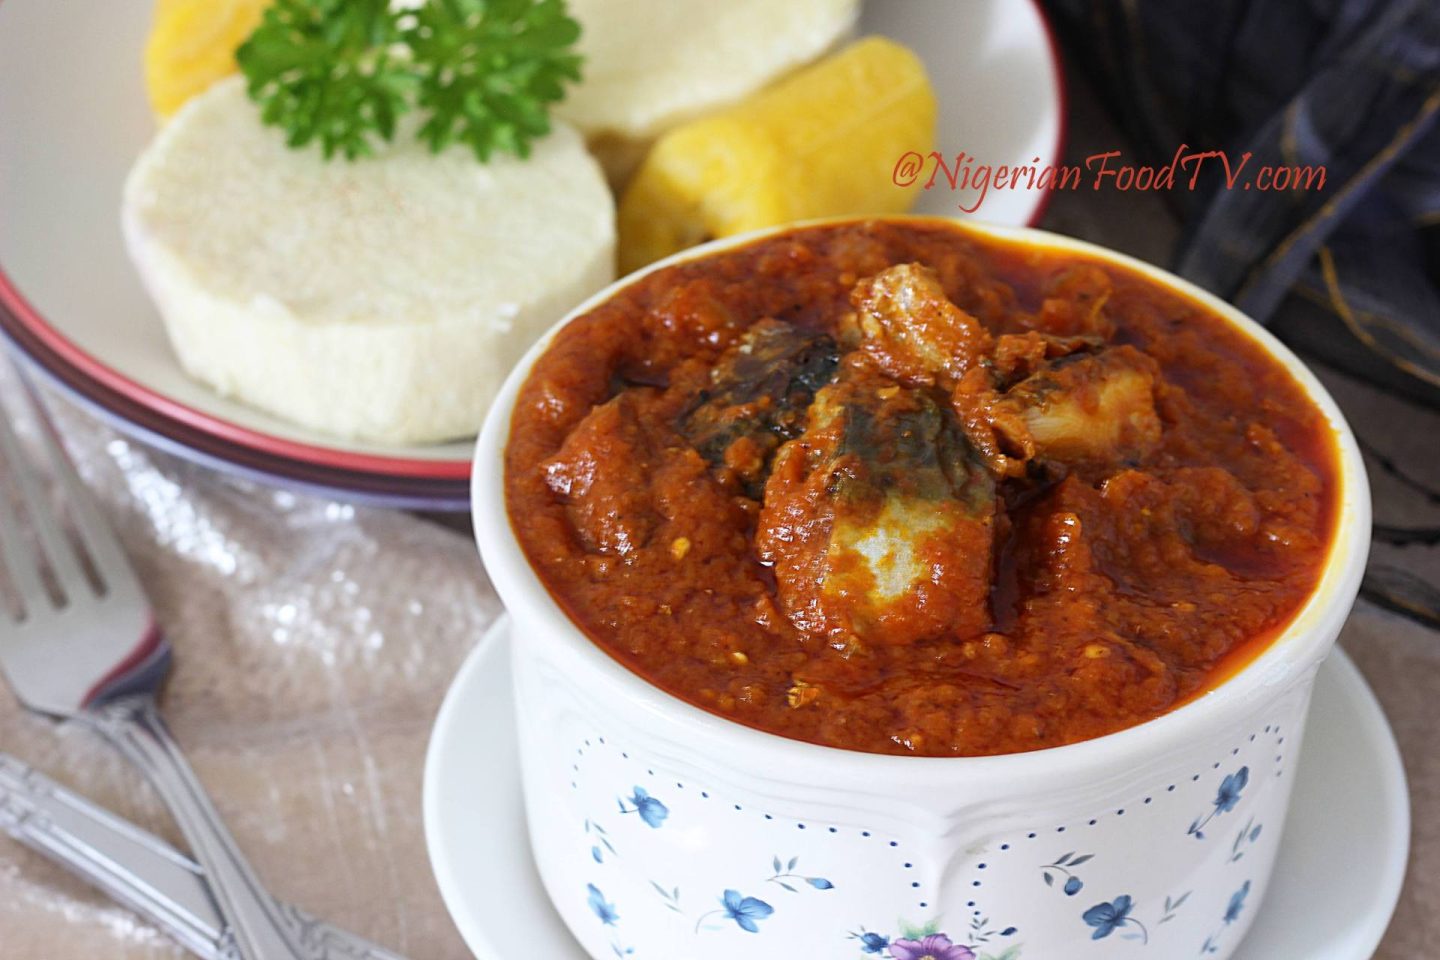 Traditional African Dish, Homemade Stew with Garden Eggs, How to make Nigerian Garden Egg Stew, What are garden eggs in Nigerian cuisine, Can I use eggplants instead of garden eggs, Is Nigerian Garden Egg Stew vegetarian-friendly, What are the spices in Nigerian Garden Egg Stew, 